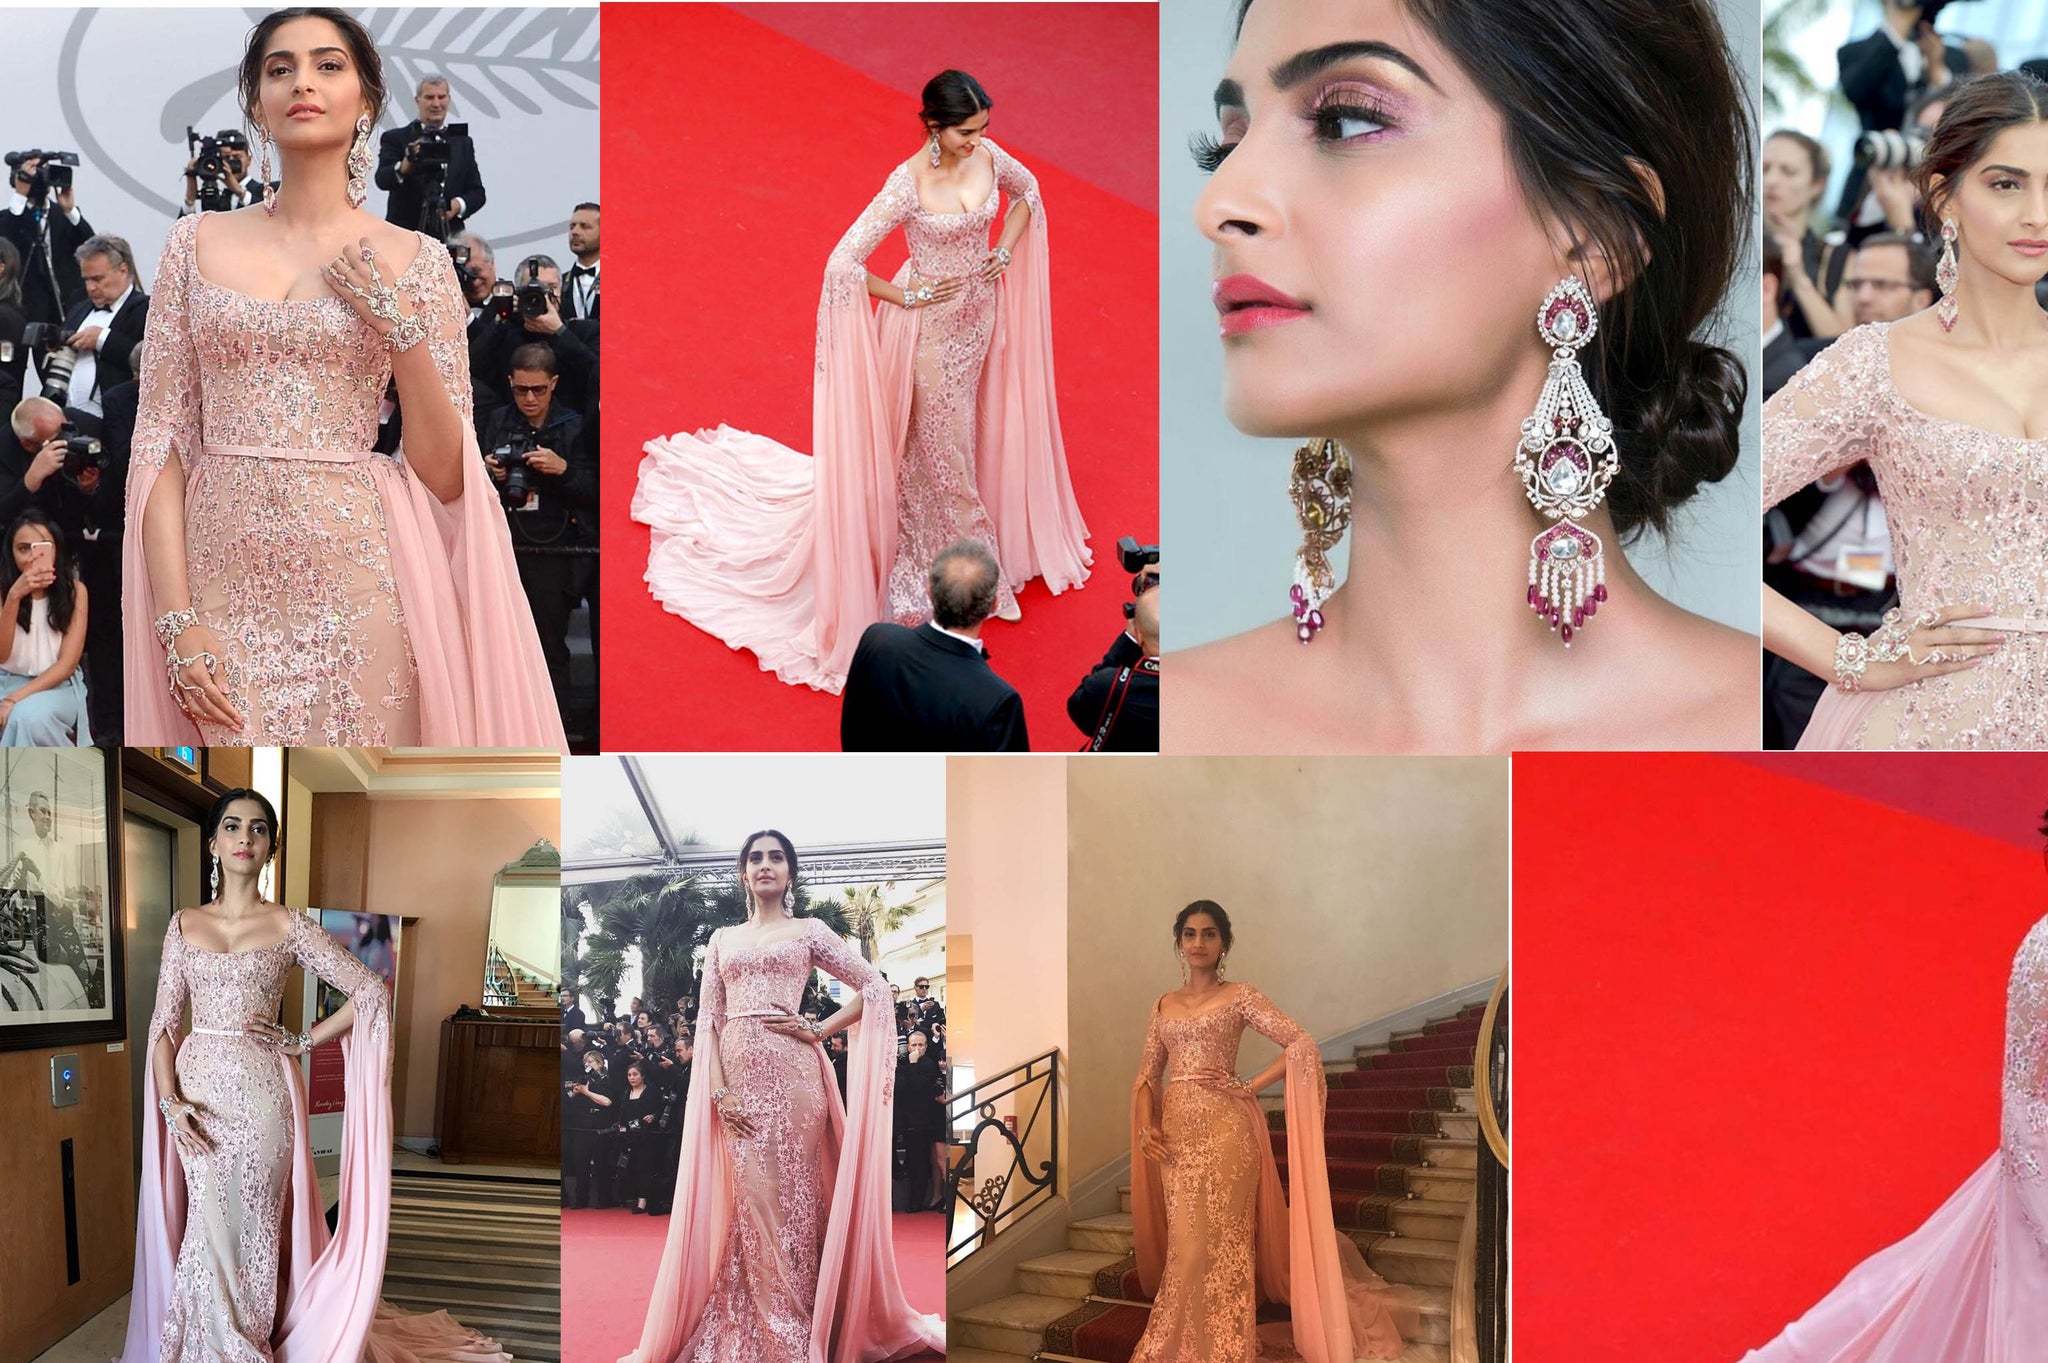 Sonam Kapoor lights up the red carpet in custom ELIE SAAB Haute Couture Gown at Cannes Film Festival 2017 